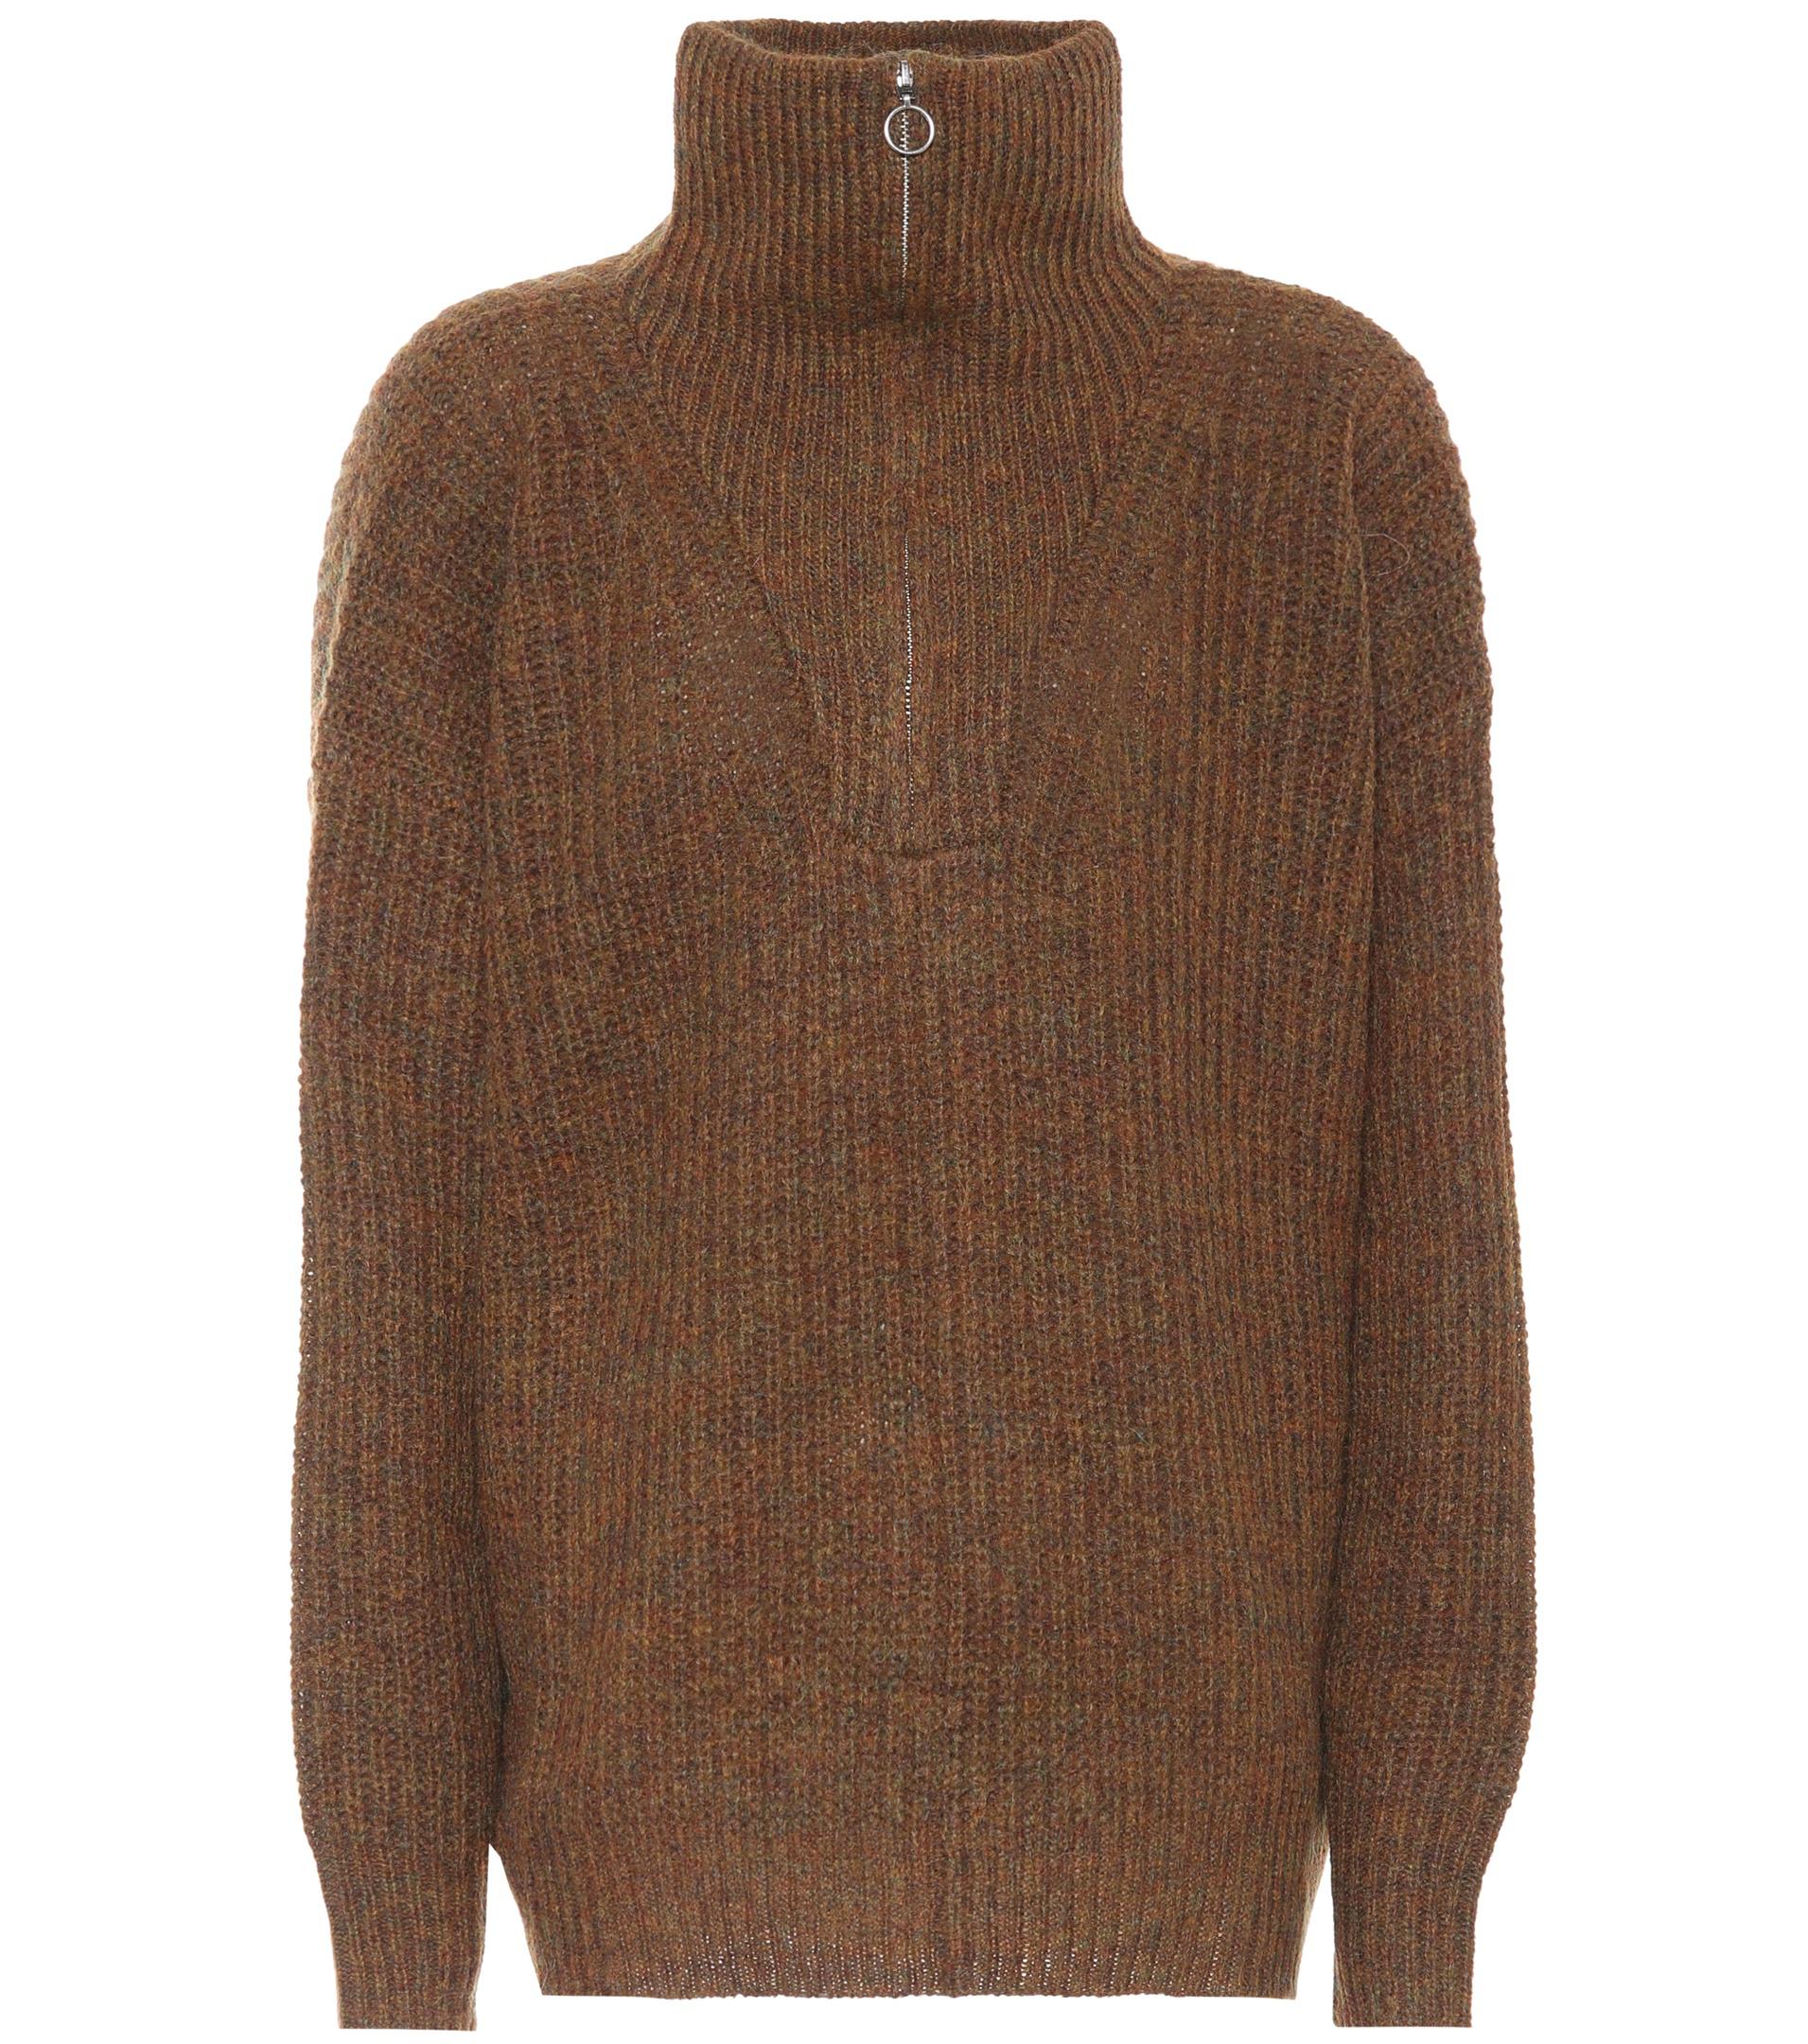 Étoile isabel marant Declan Oversized Sweater in Brown | Lyst